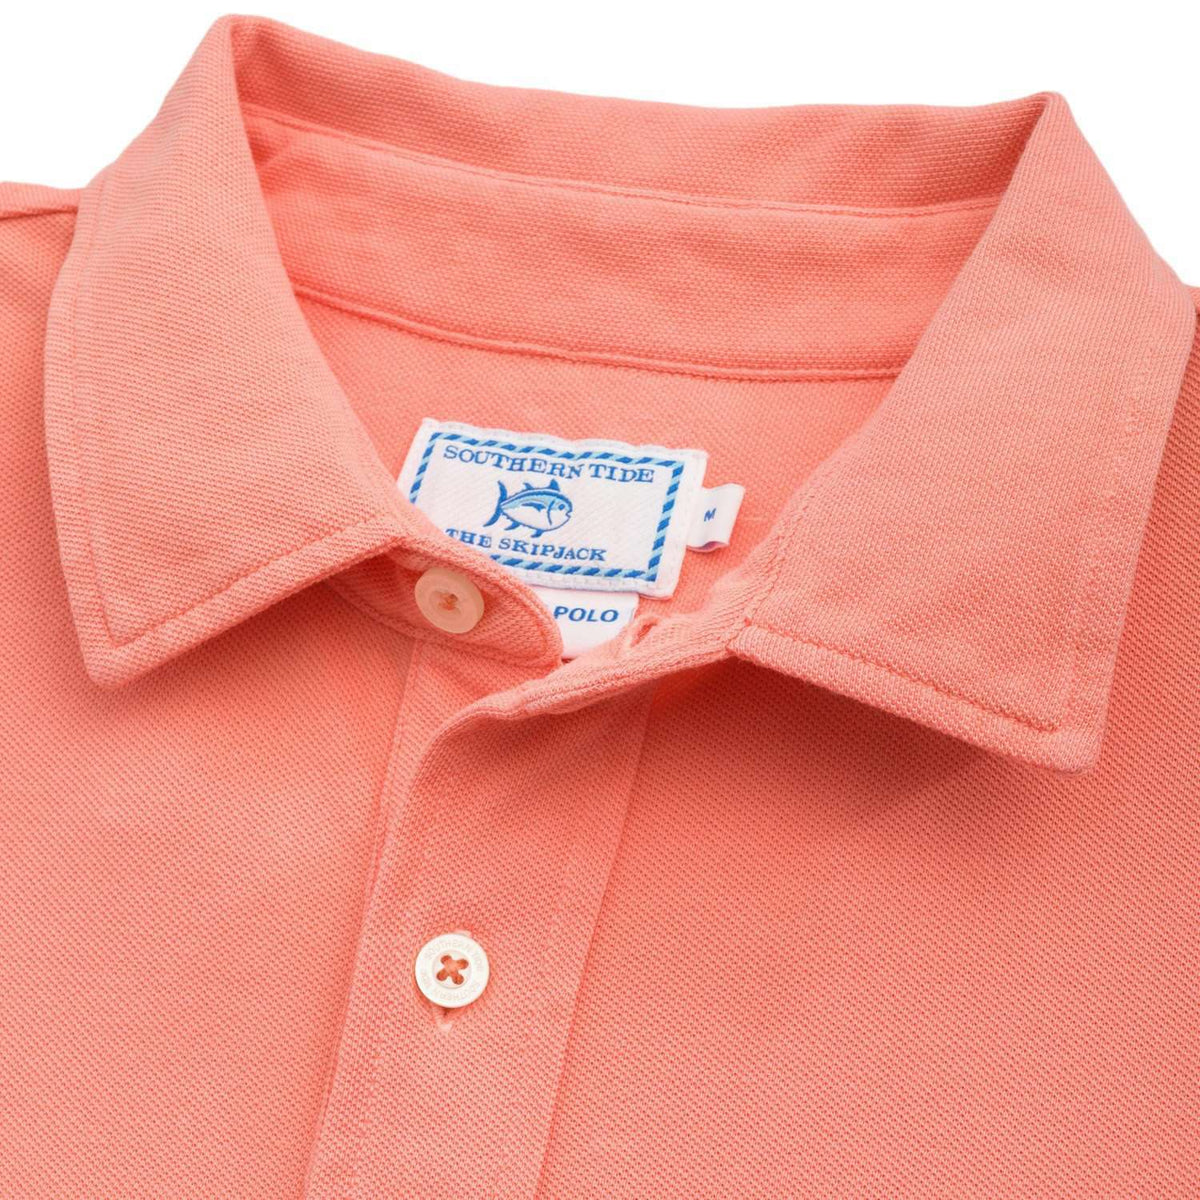 Short Sleeve Beachside Polo in Nectar by Southern Tide - Country Club Prep